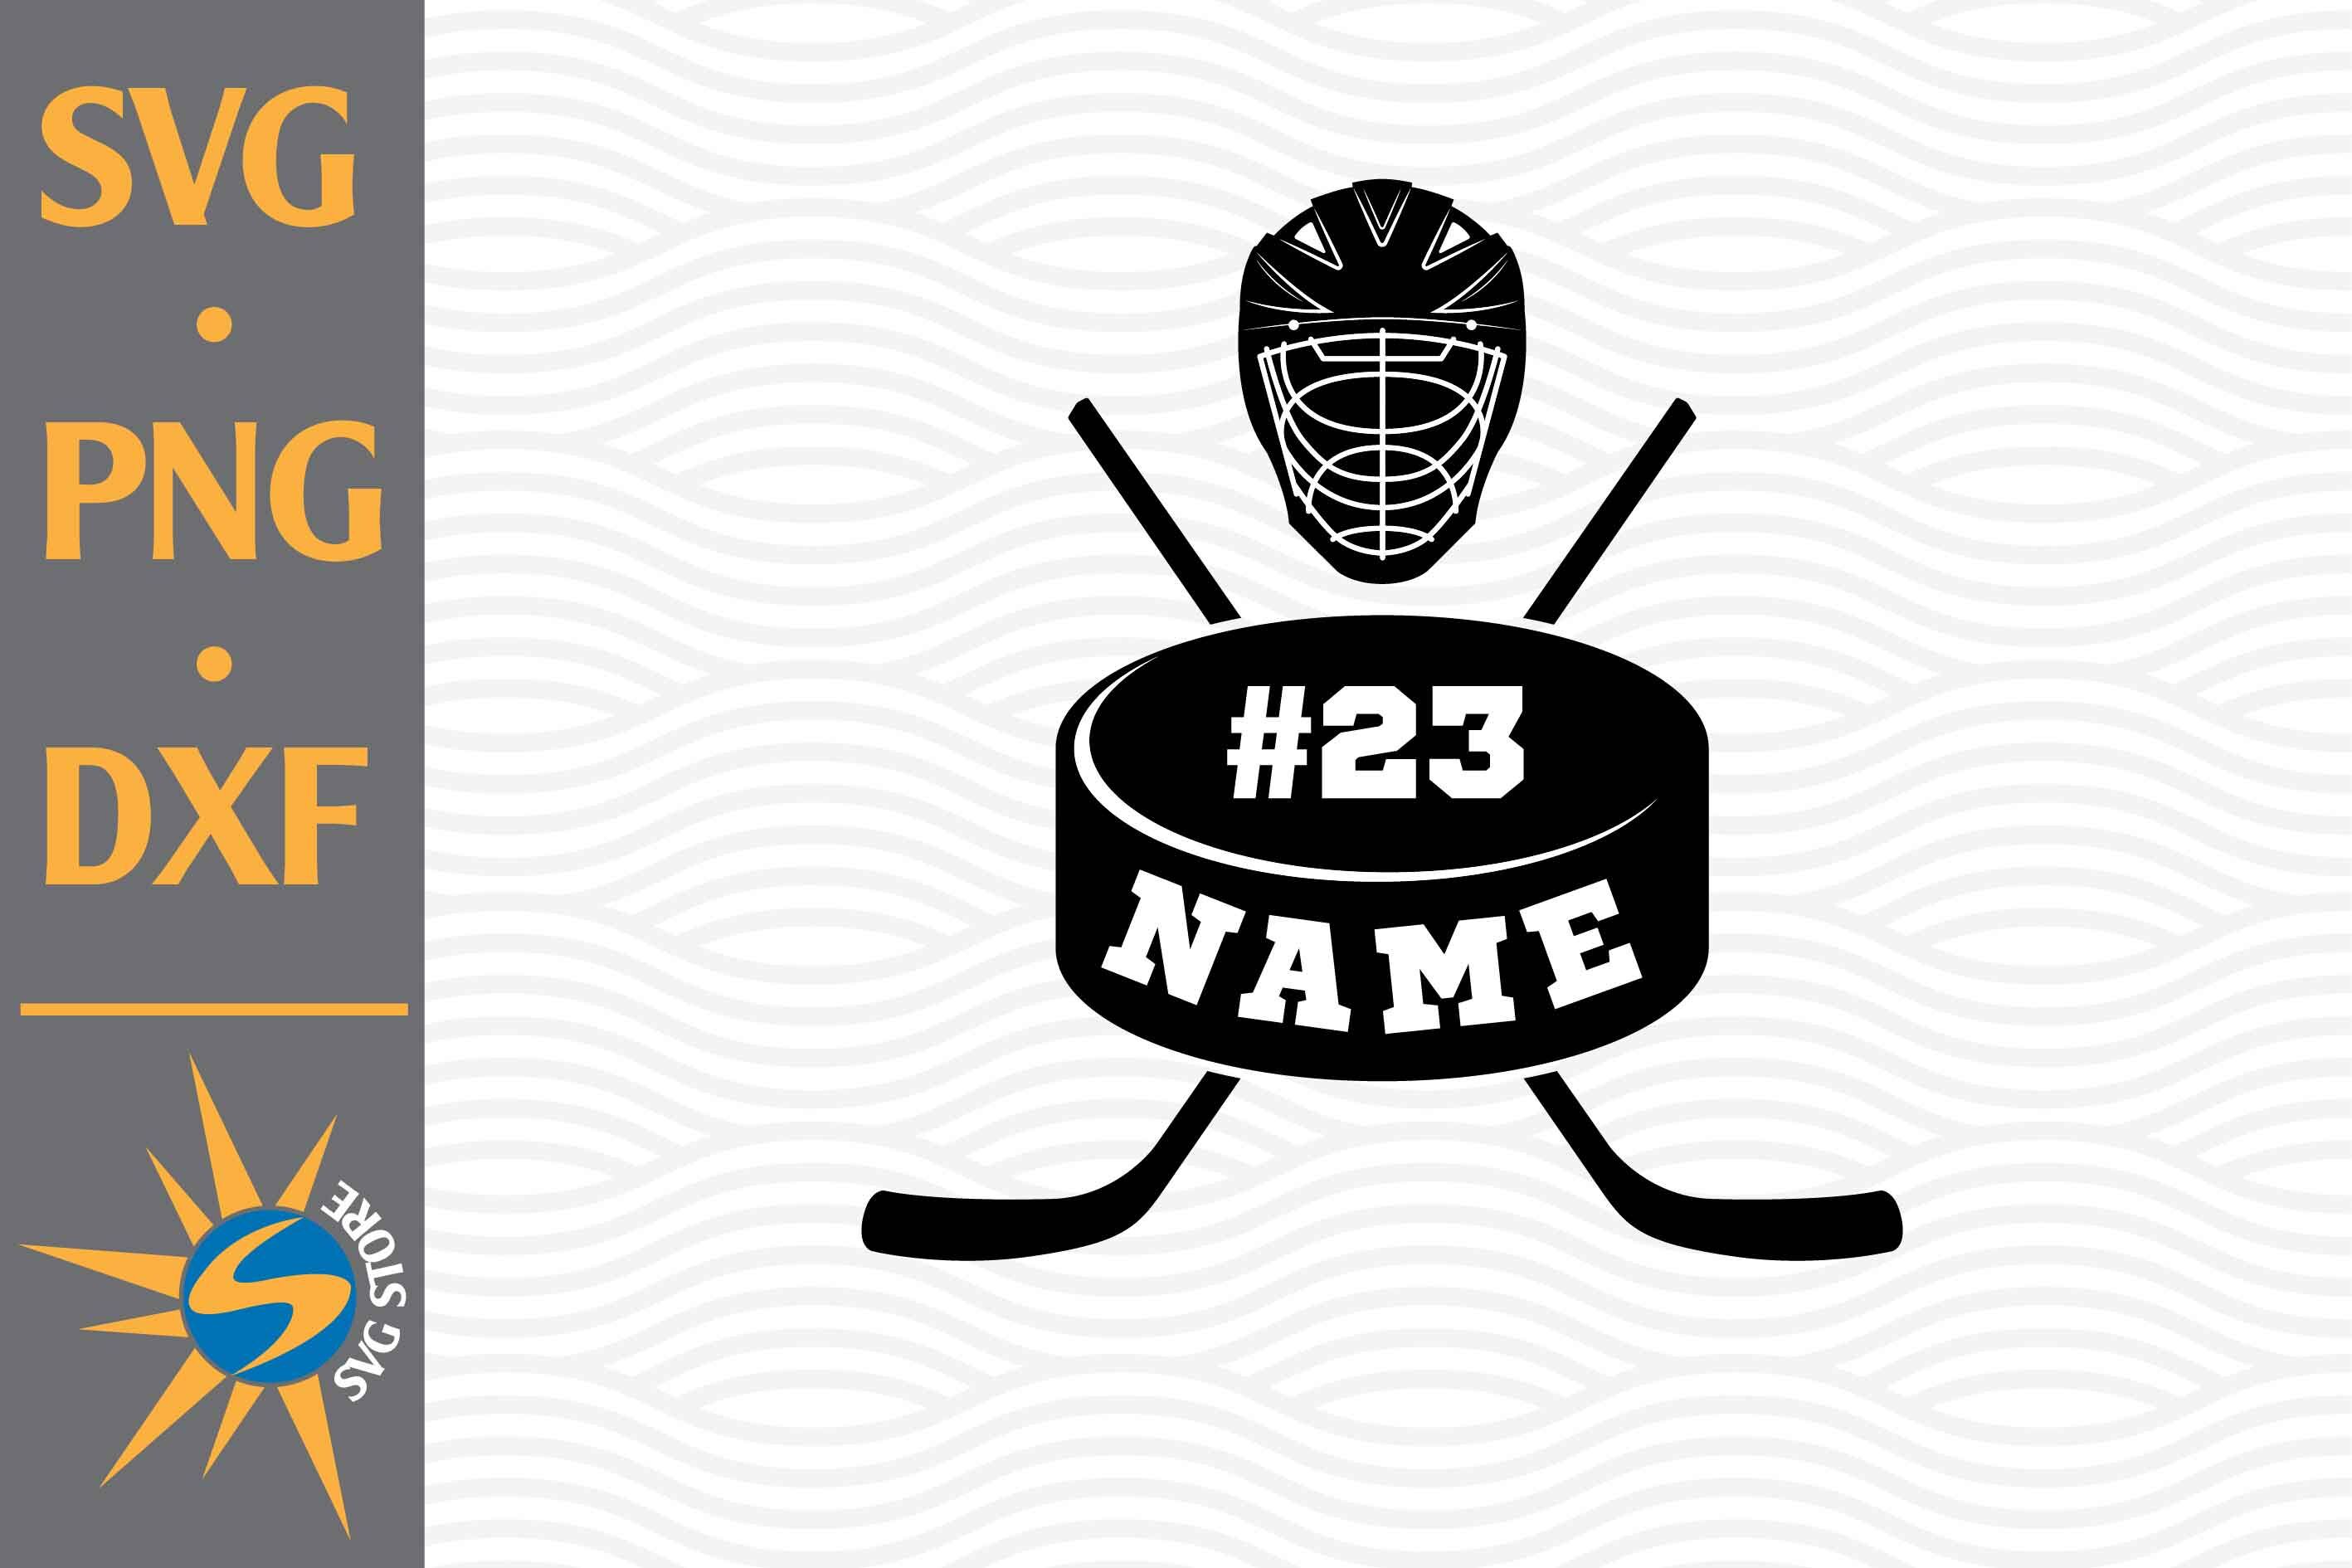 Hockey Clipart. Free Download Transparent .PNG or Vector